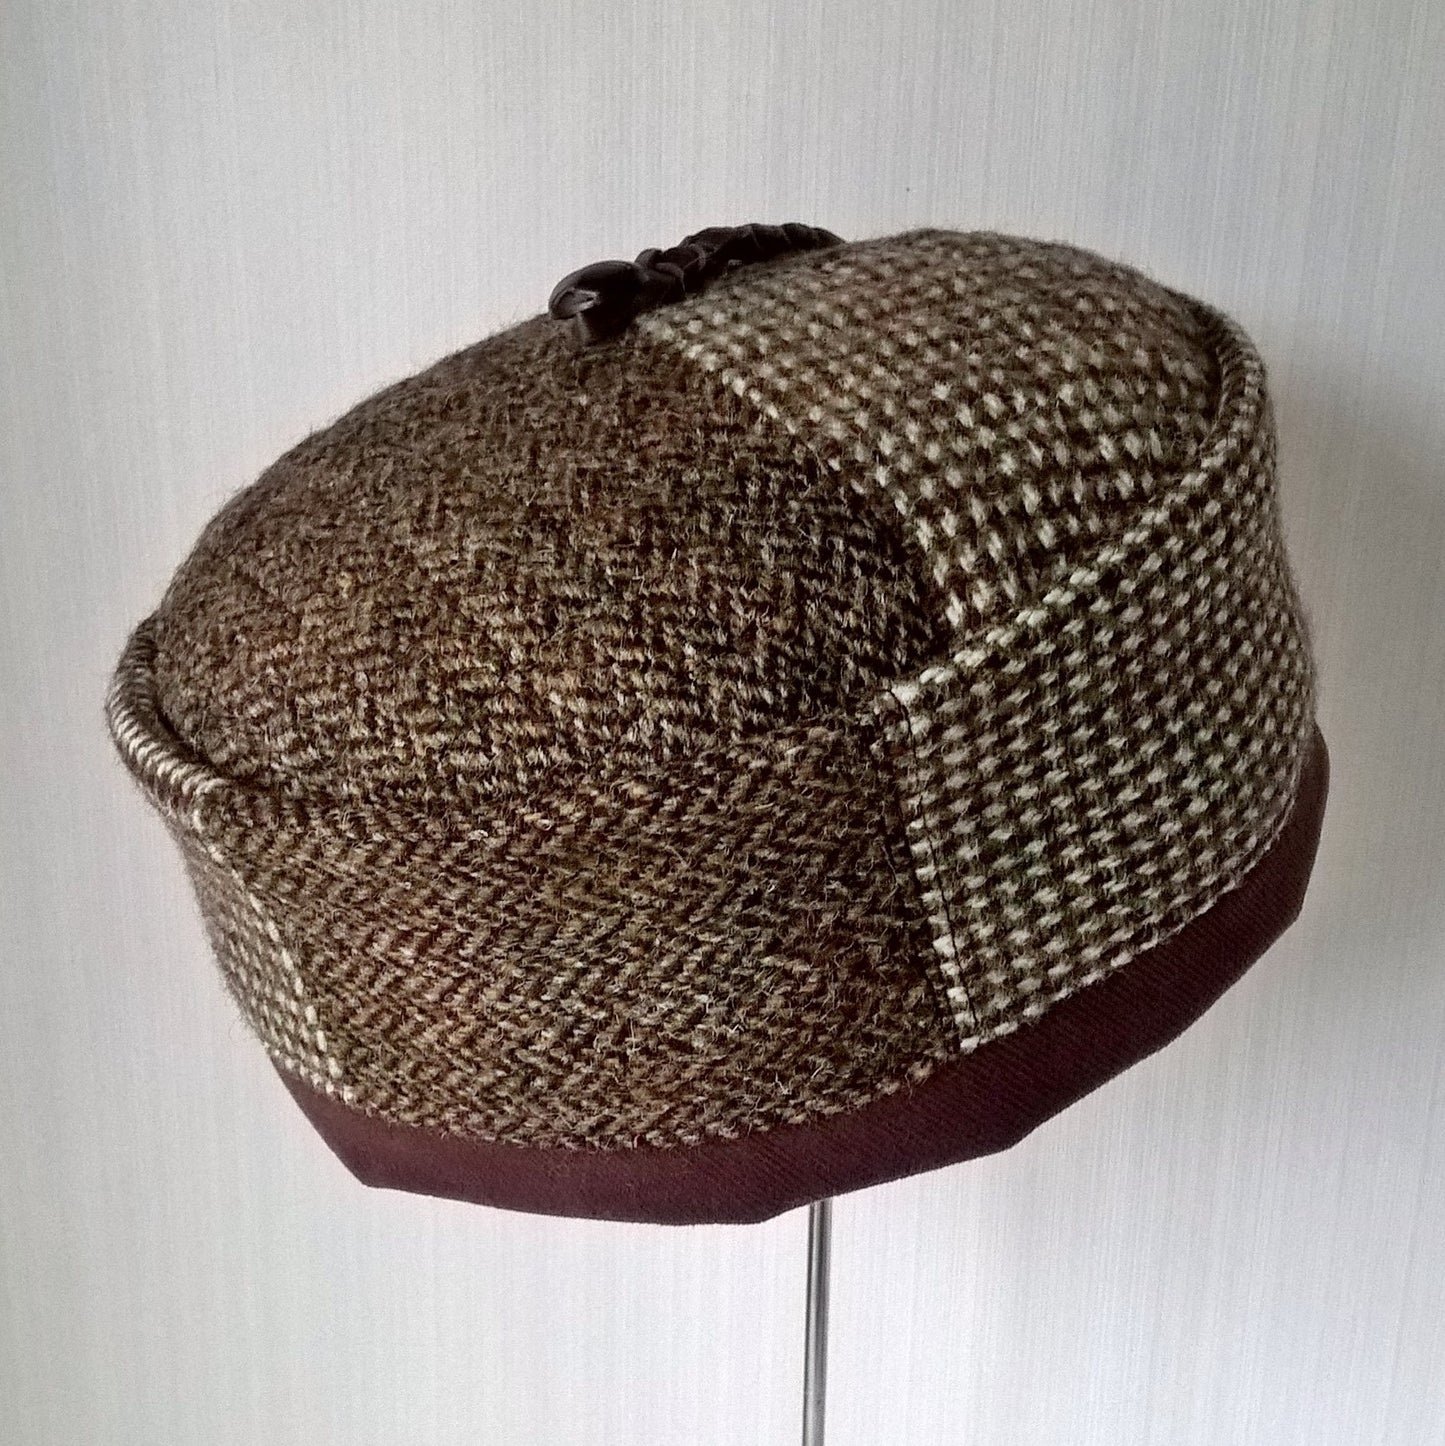 Pillbox shaped hat handmade from up-cycled vintage Harris Tweed jackets